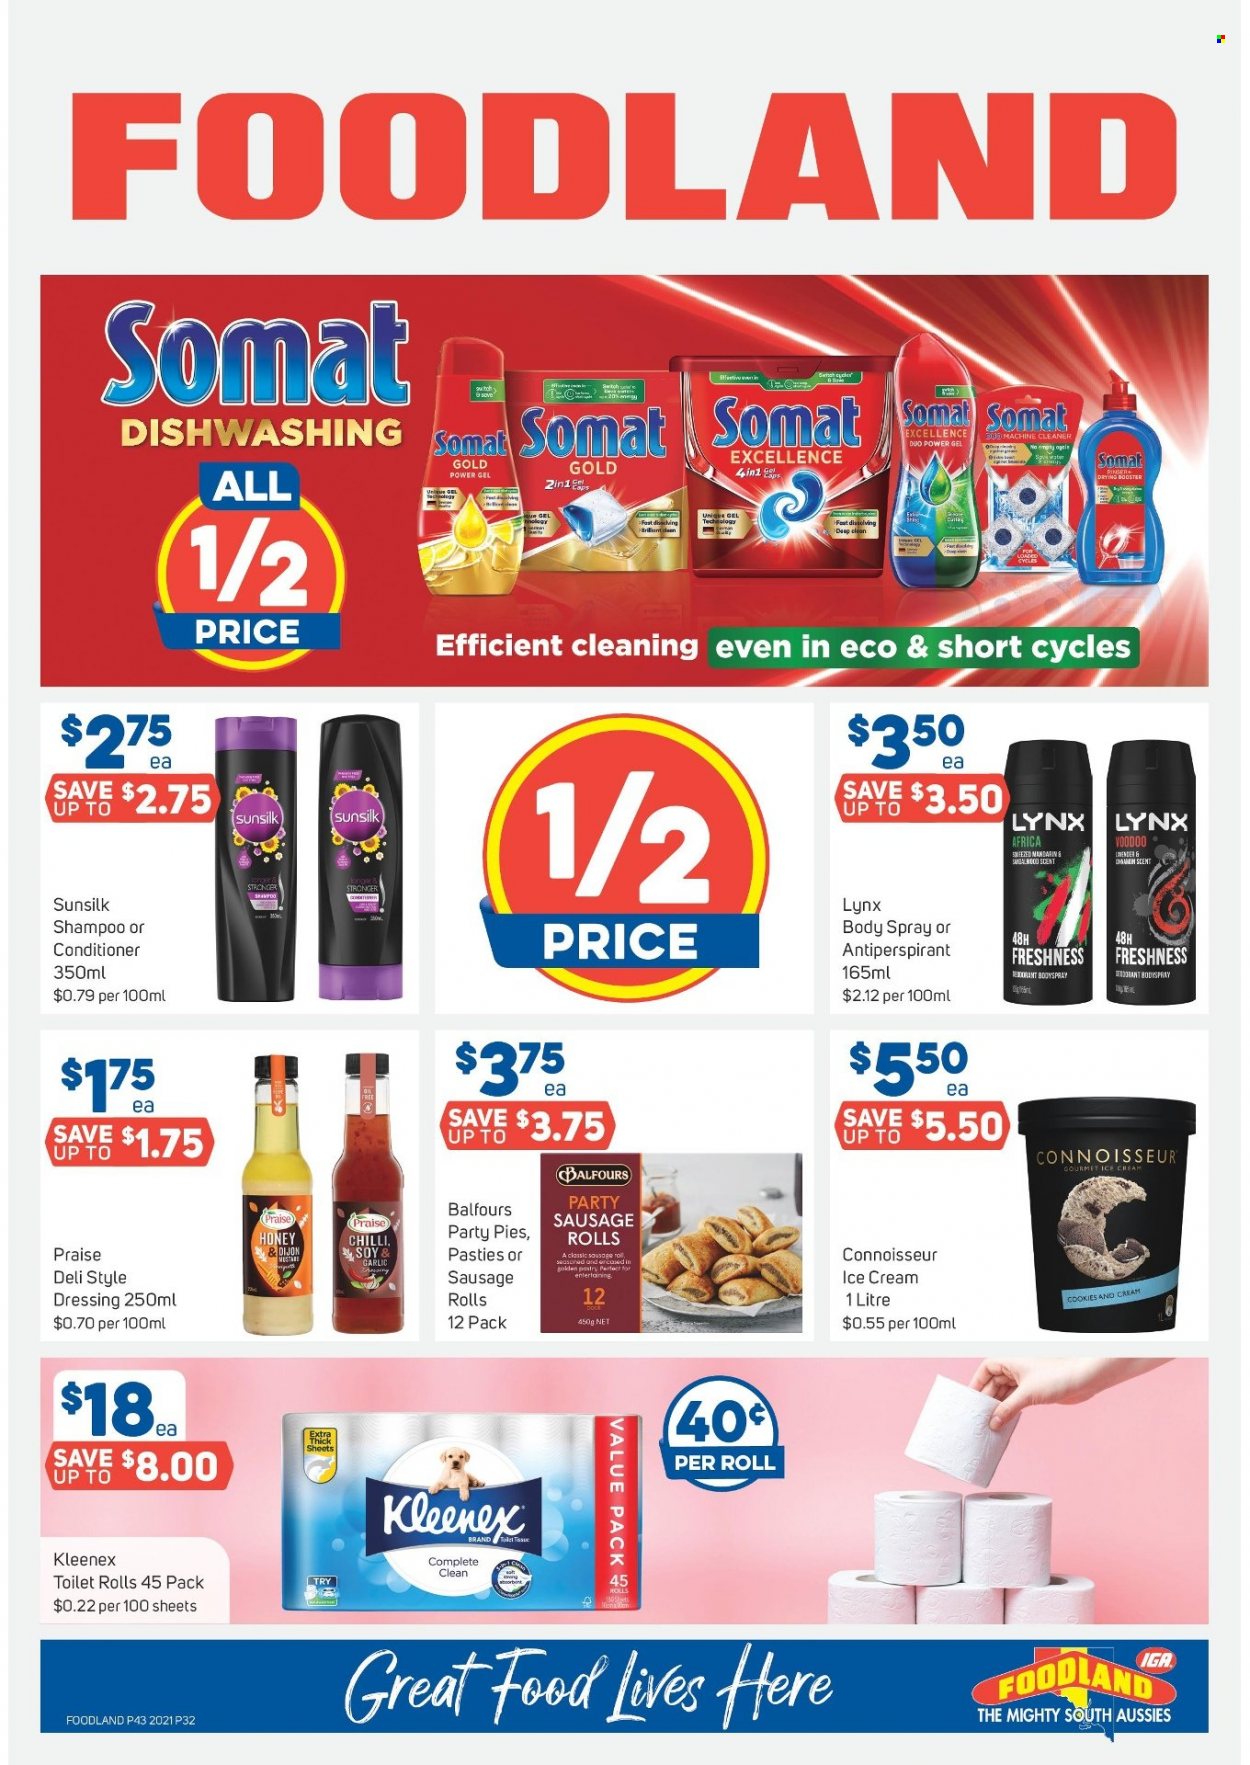 thumbnail - Foodland Catalogue - 20 Oct 2021 - 26 Oct 2021 - Sales products - sausage rolls, mandarines, sausage, ice cream, cookies, dressing, honey, Kleenex, toilet paper, cleaner, shampoo, Sunsilk, conditioner, body spray, anti-perspirant. Page 32.